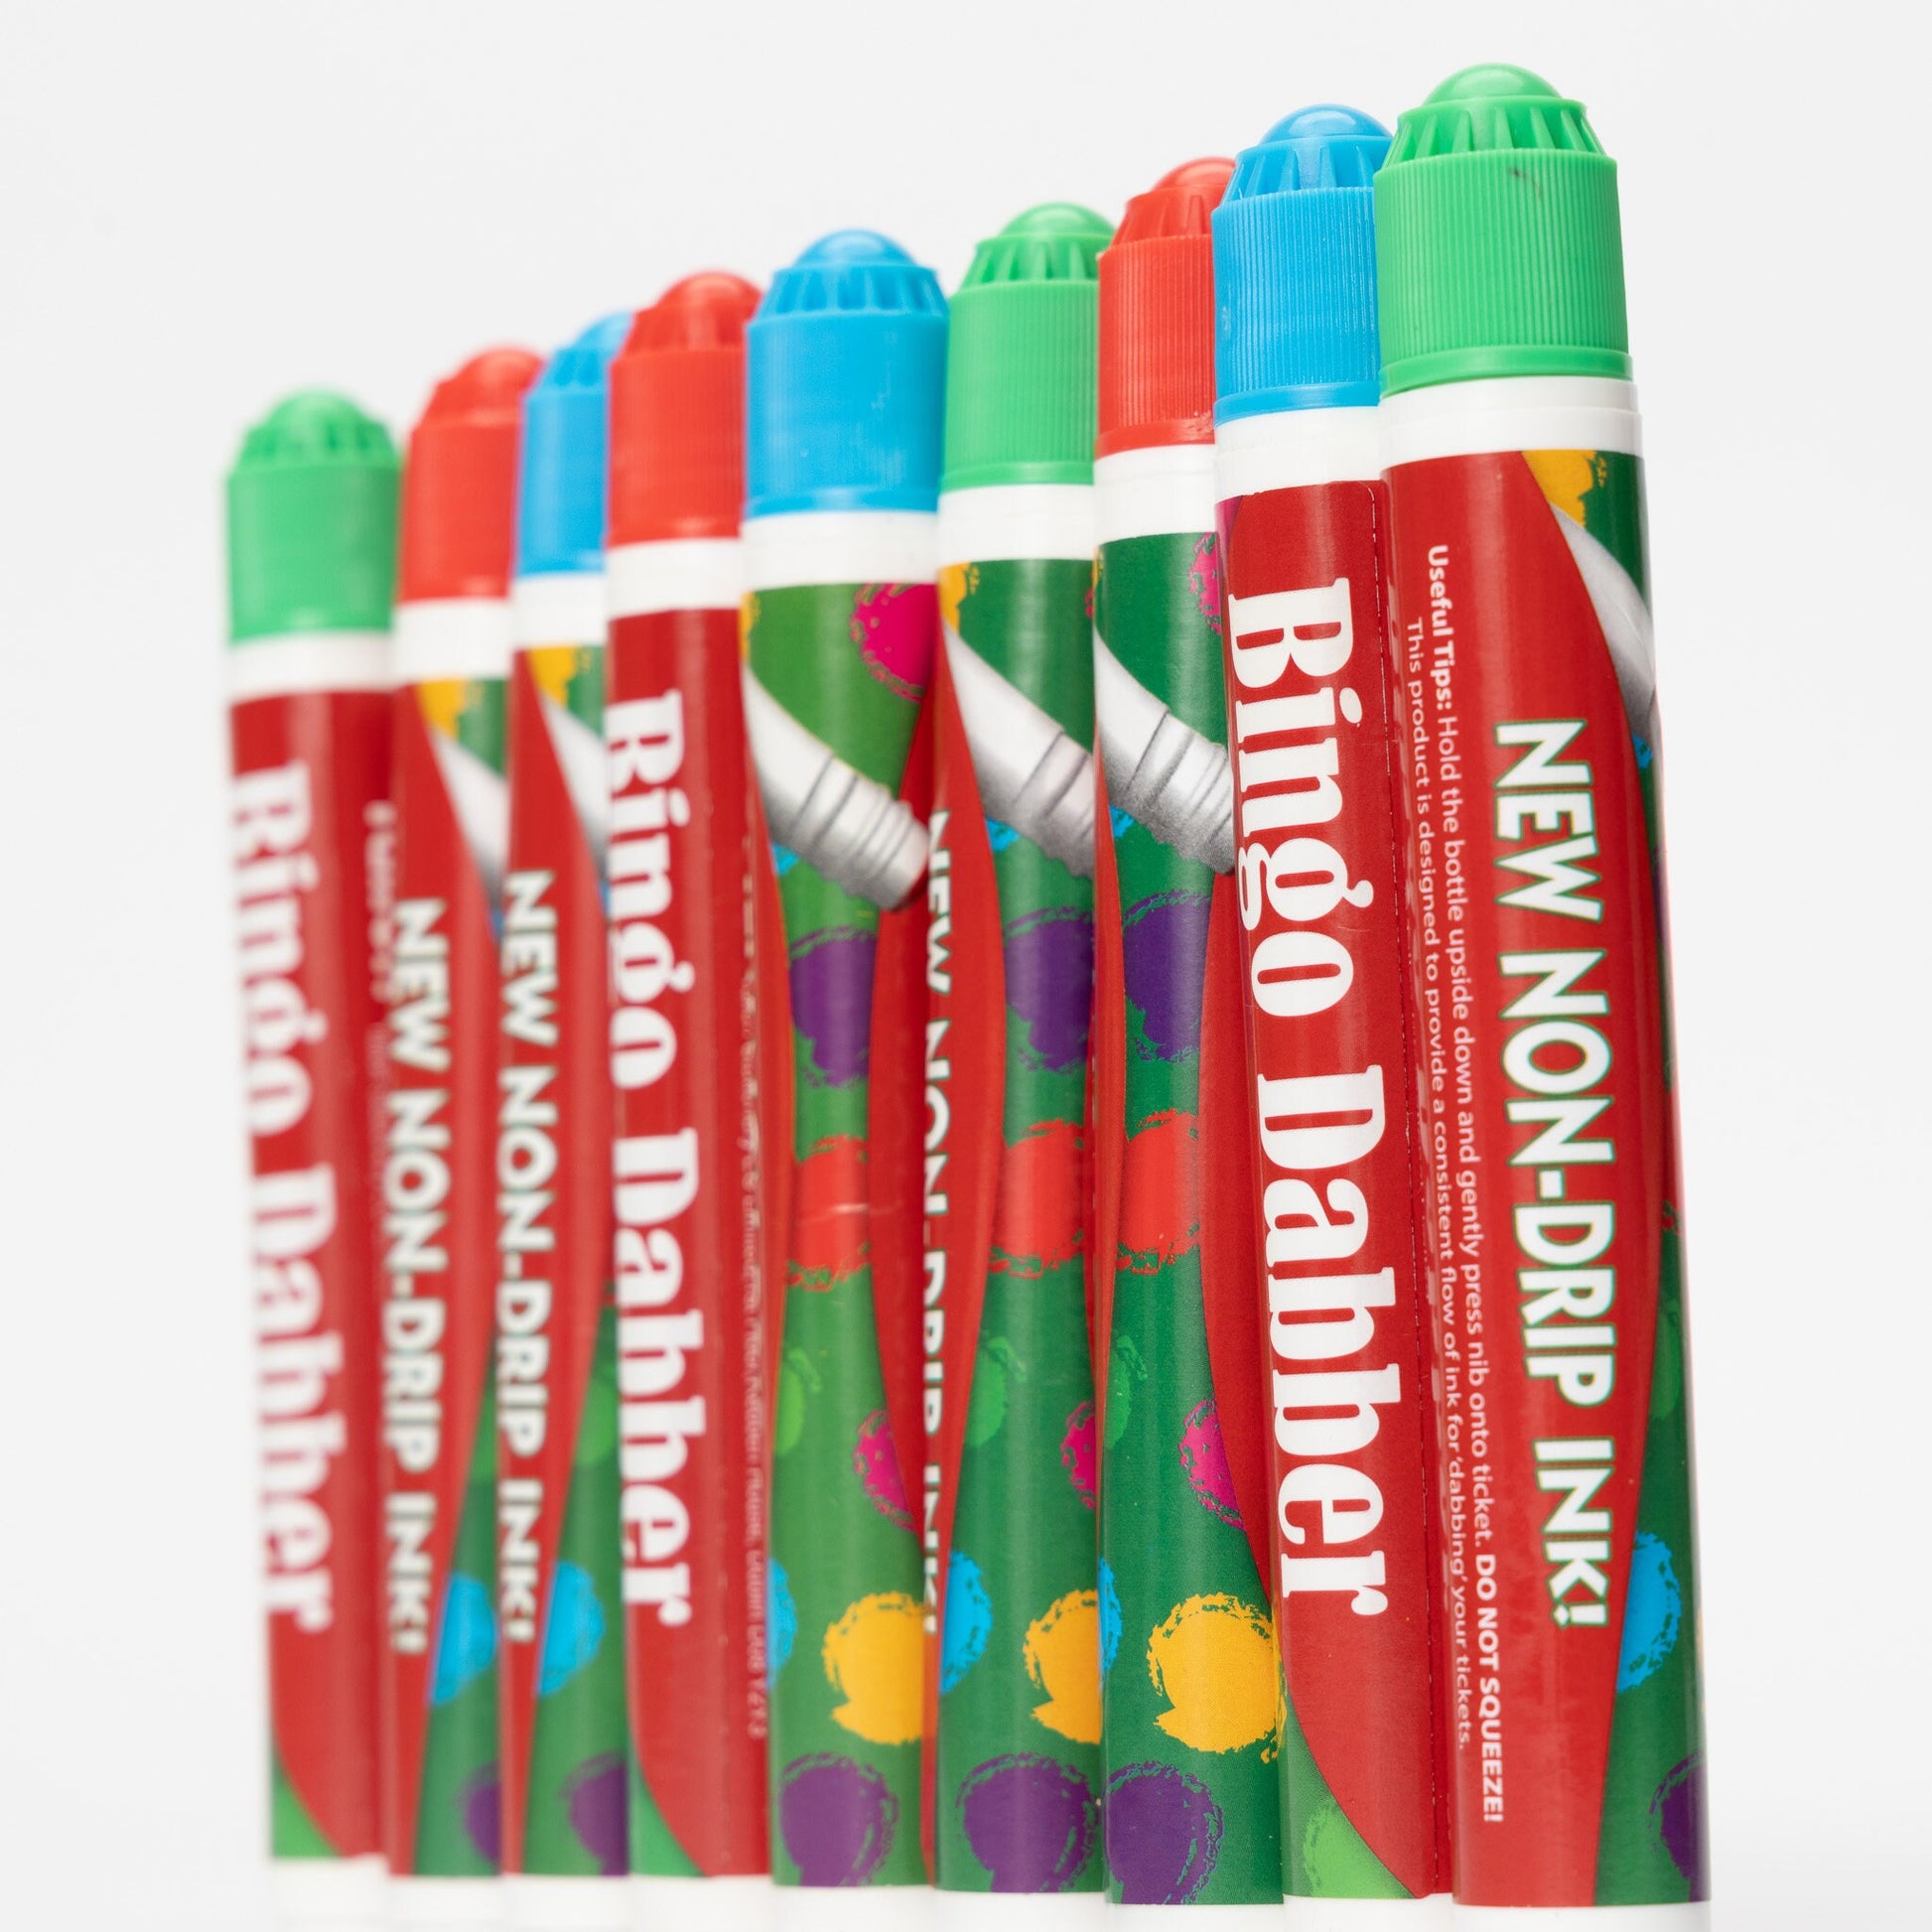 evelay Bingo Dabbers Colorful Markers for Exciting Bingo Games Pack of 3 Keechi & co.